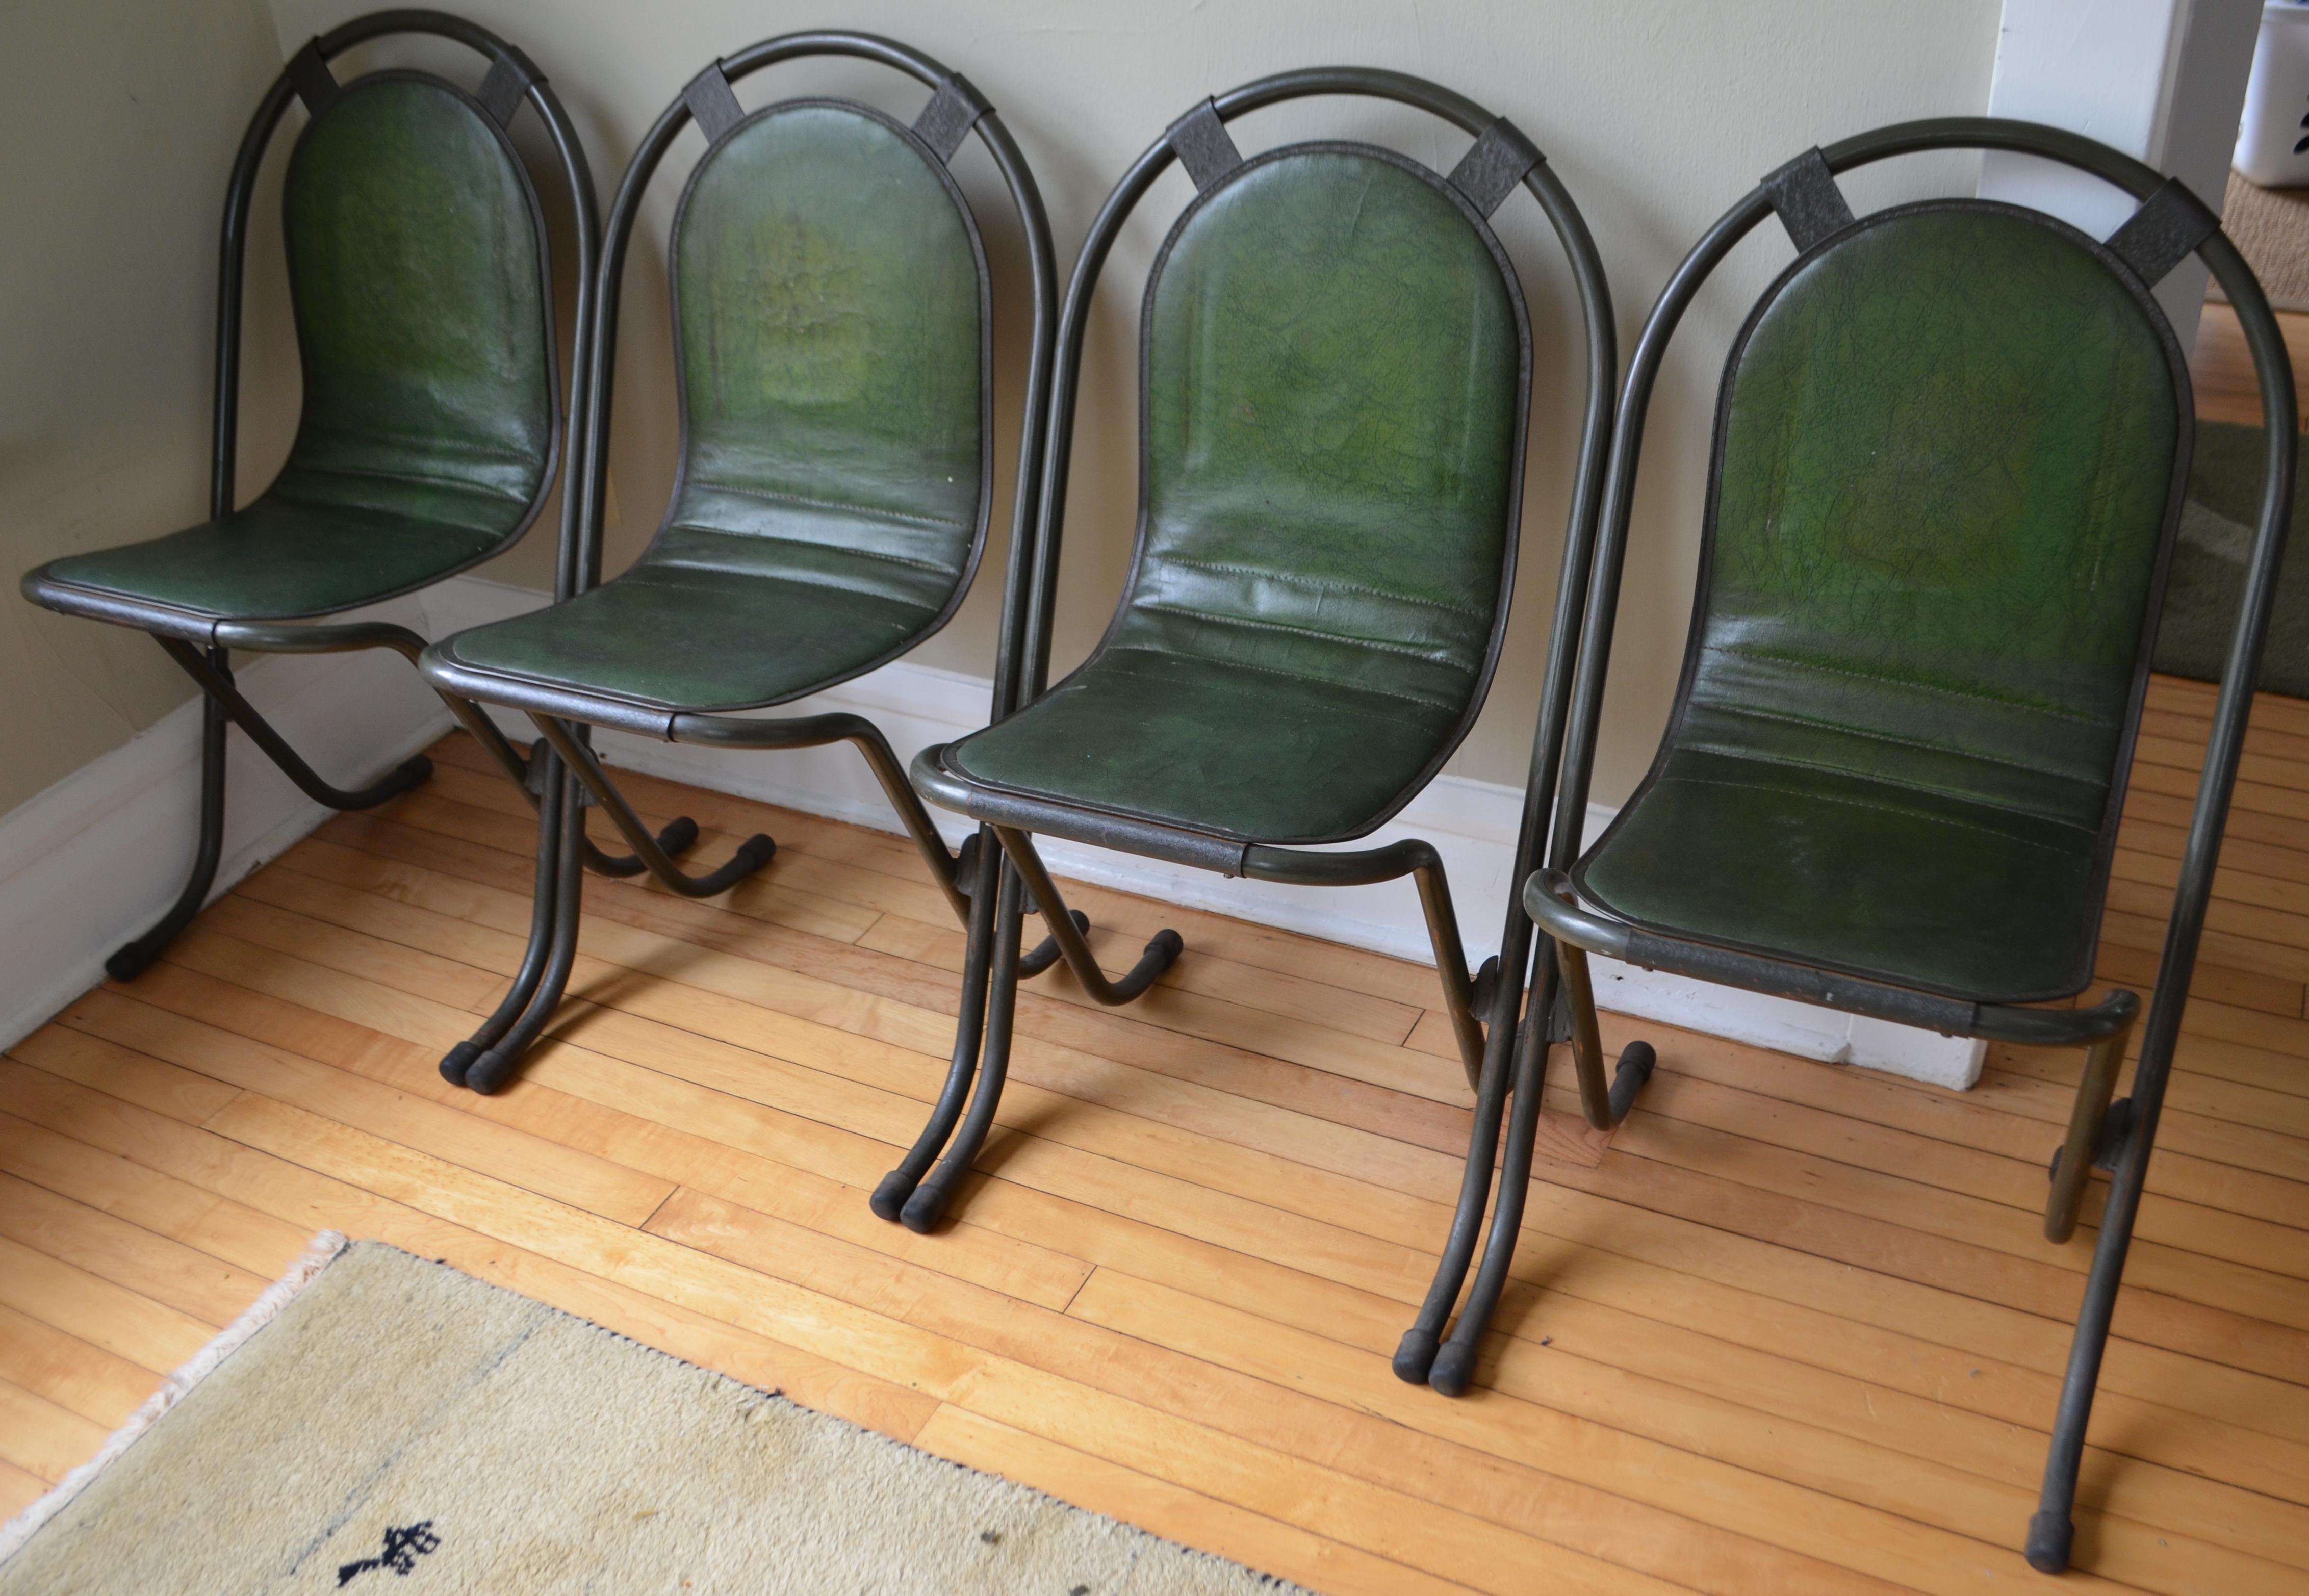 Original Stak-a-Bye chairs from Sebel of England, circa 1940. Set of 4. Padded green faux leather covers pressed metal seat and back mounted on a tubular steel frame. Legs capped in rubber feet. Debuted in 1947 when the war-weary English had finally